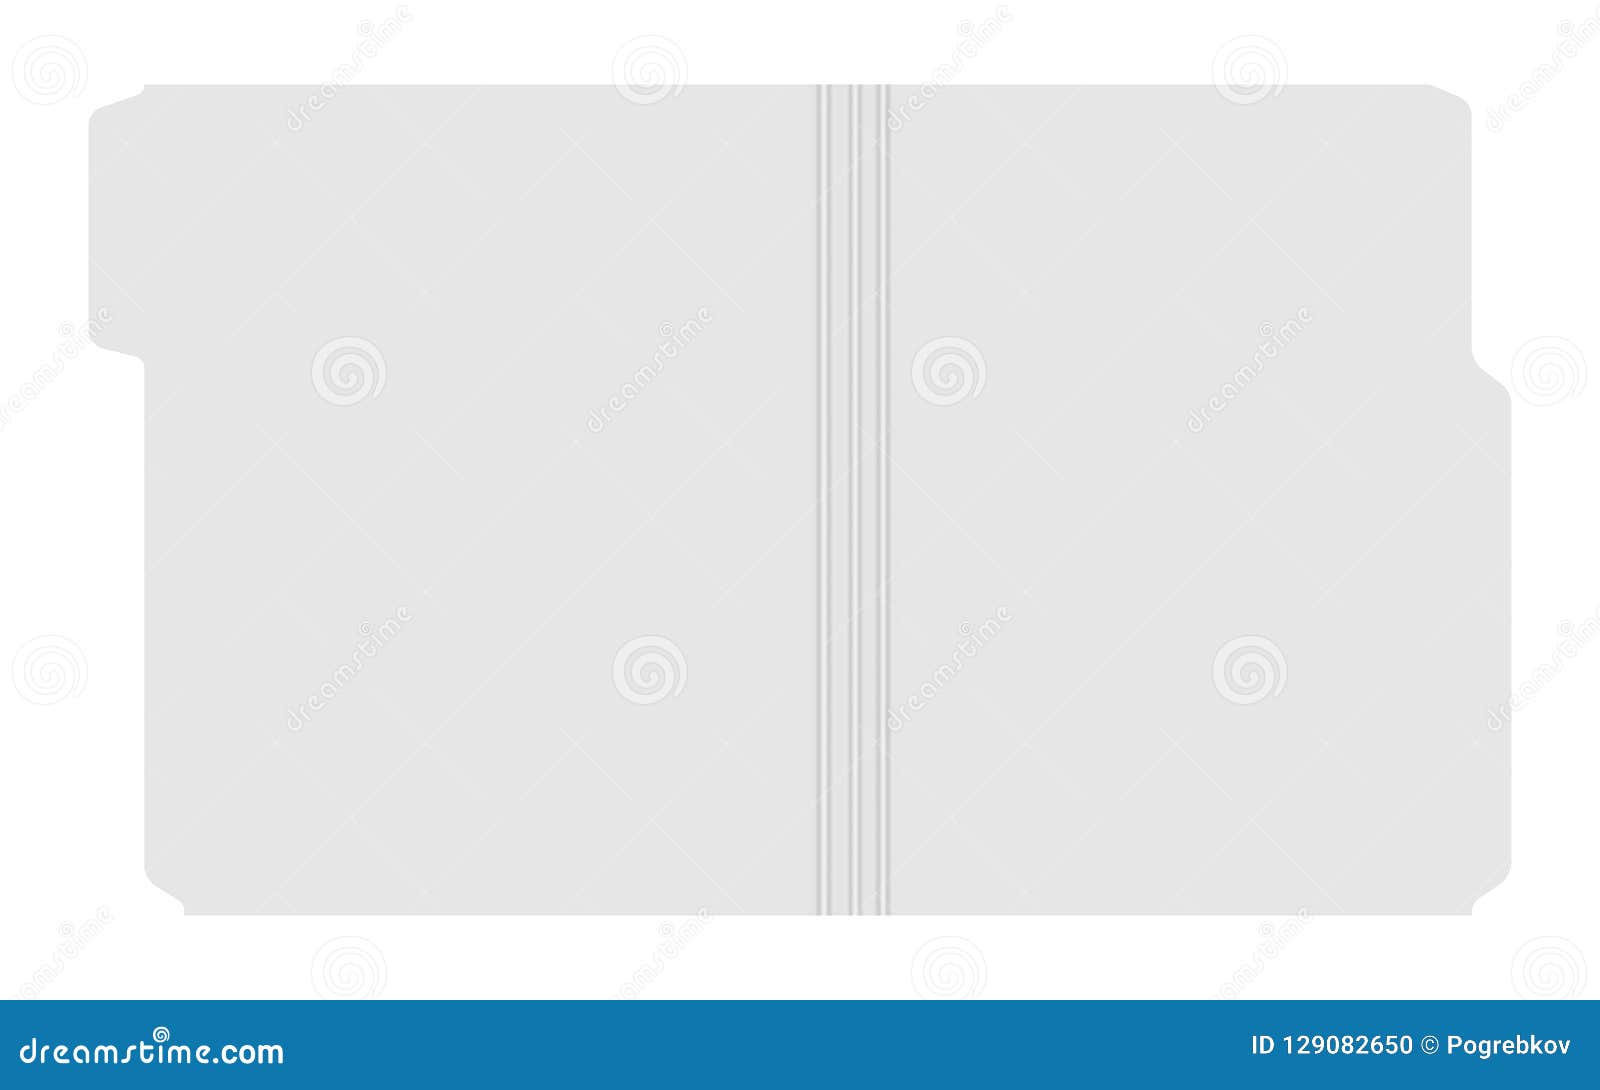 Open Empty File Folder With Cut Tab On White Background, Mockup Stock ...